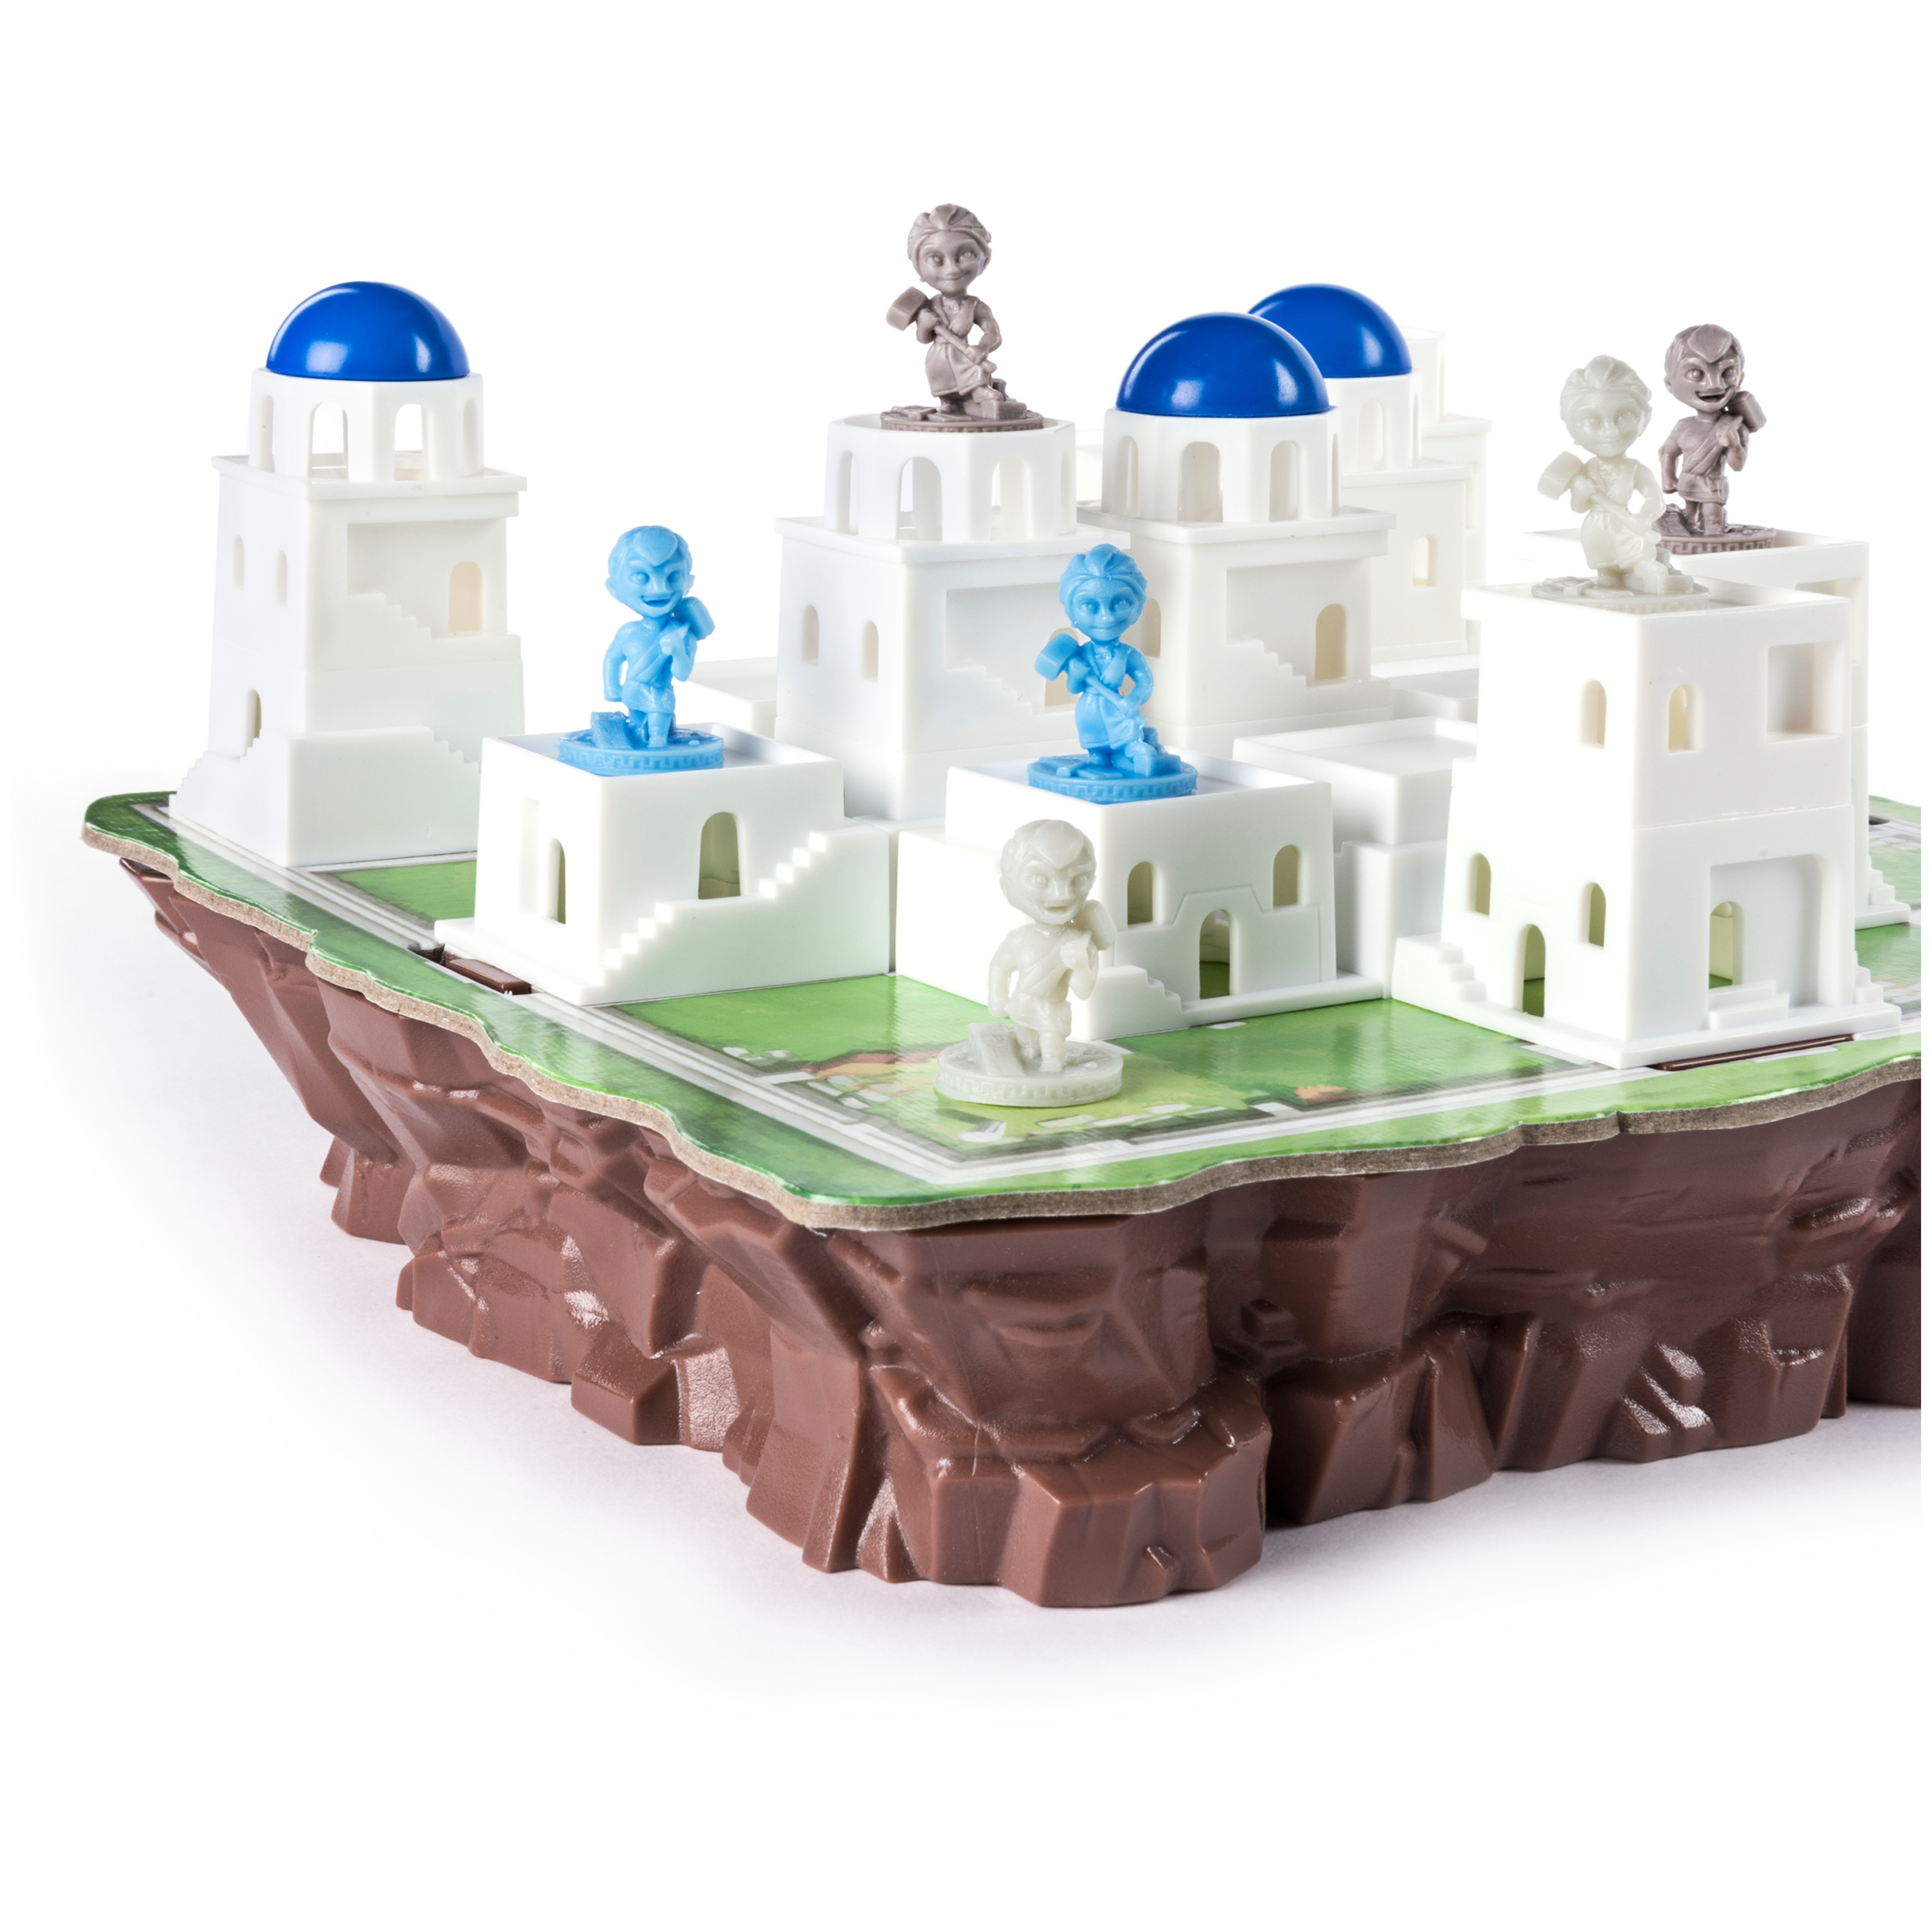 Santorini, Strategy Family Board Game 2-4 Players Classic Fun Building Greek Mythology Card Game, for Kids & Adults Ages 8 and up - image 5 of 6